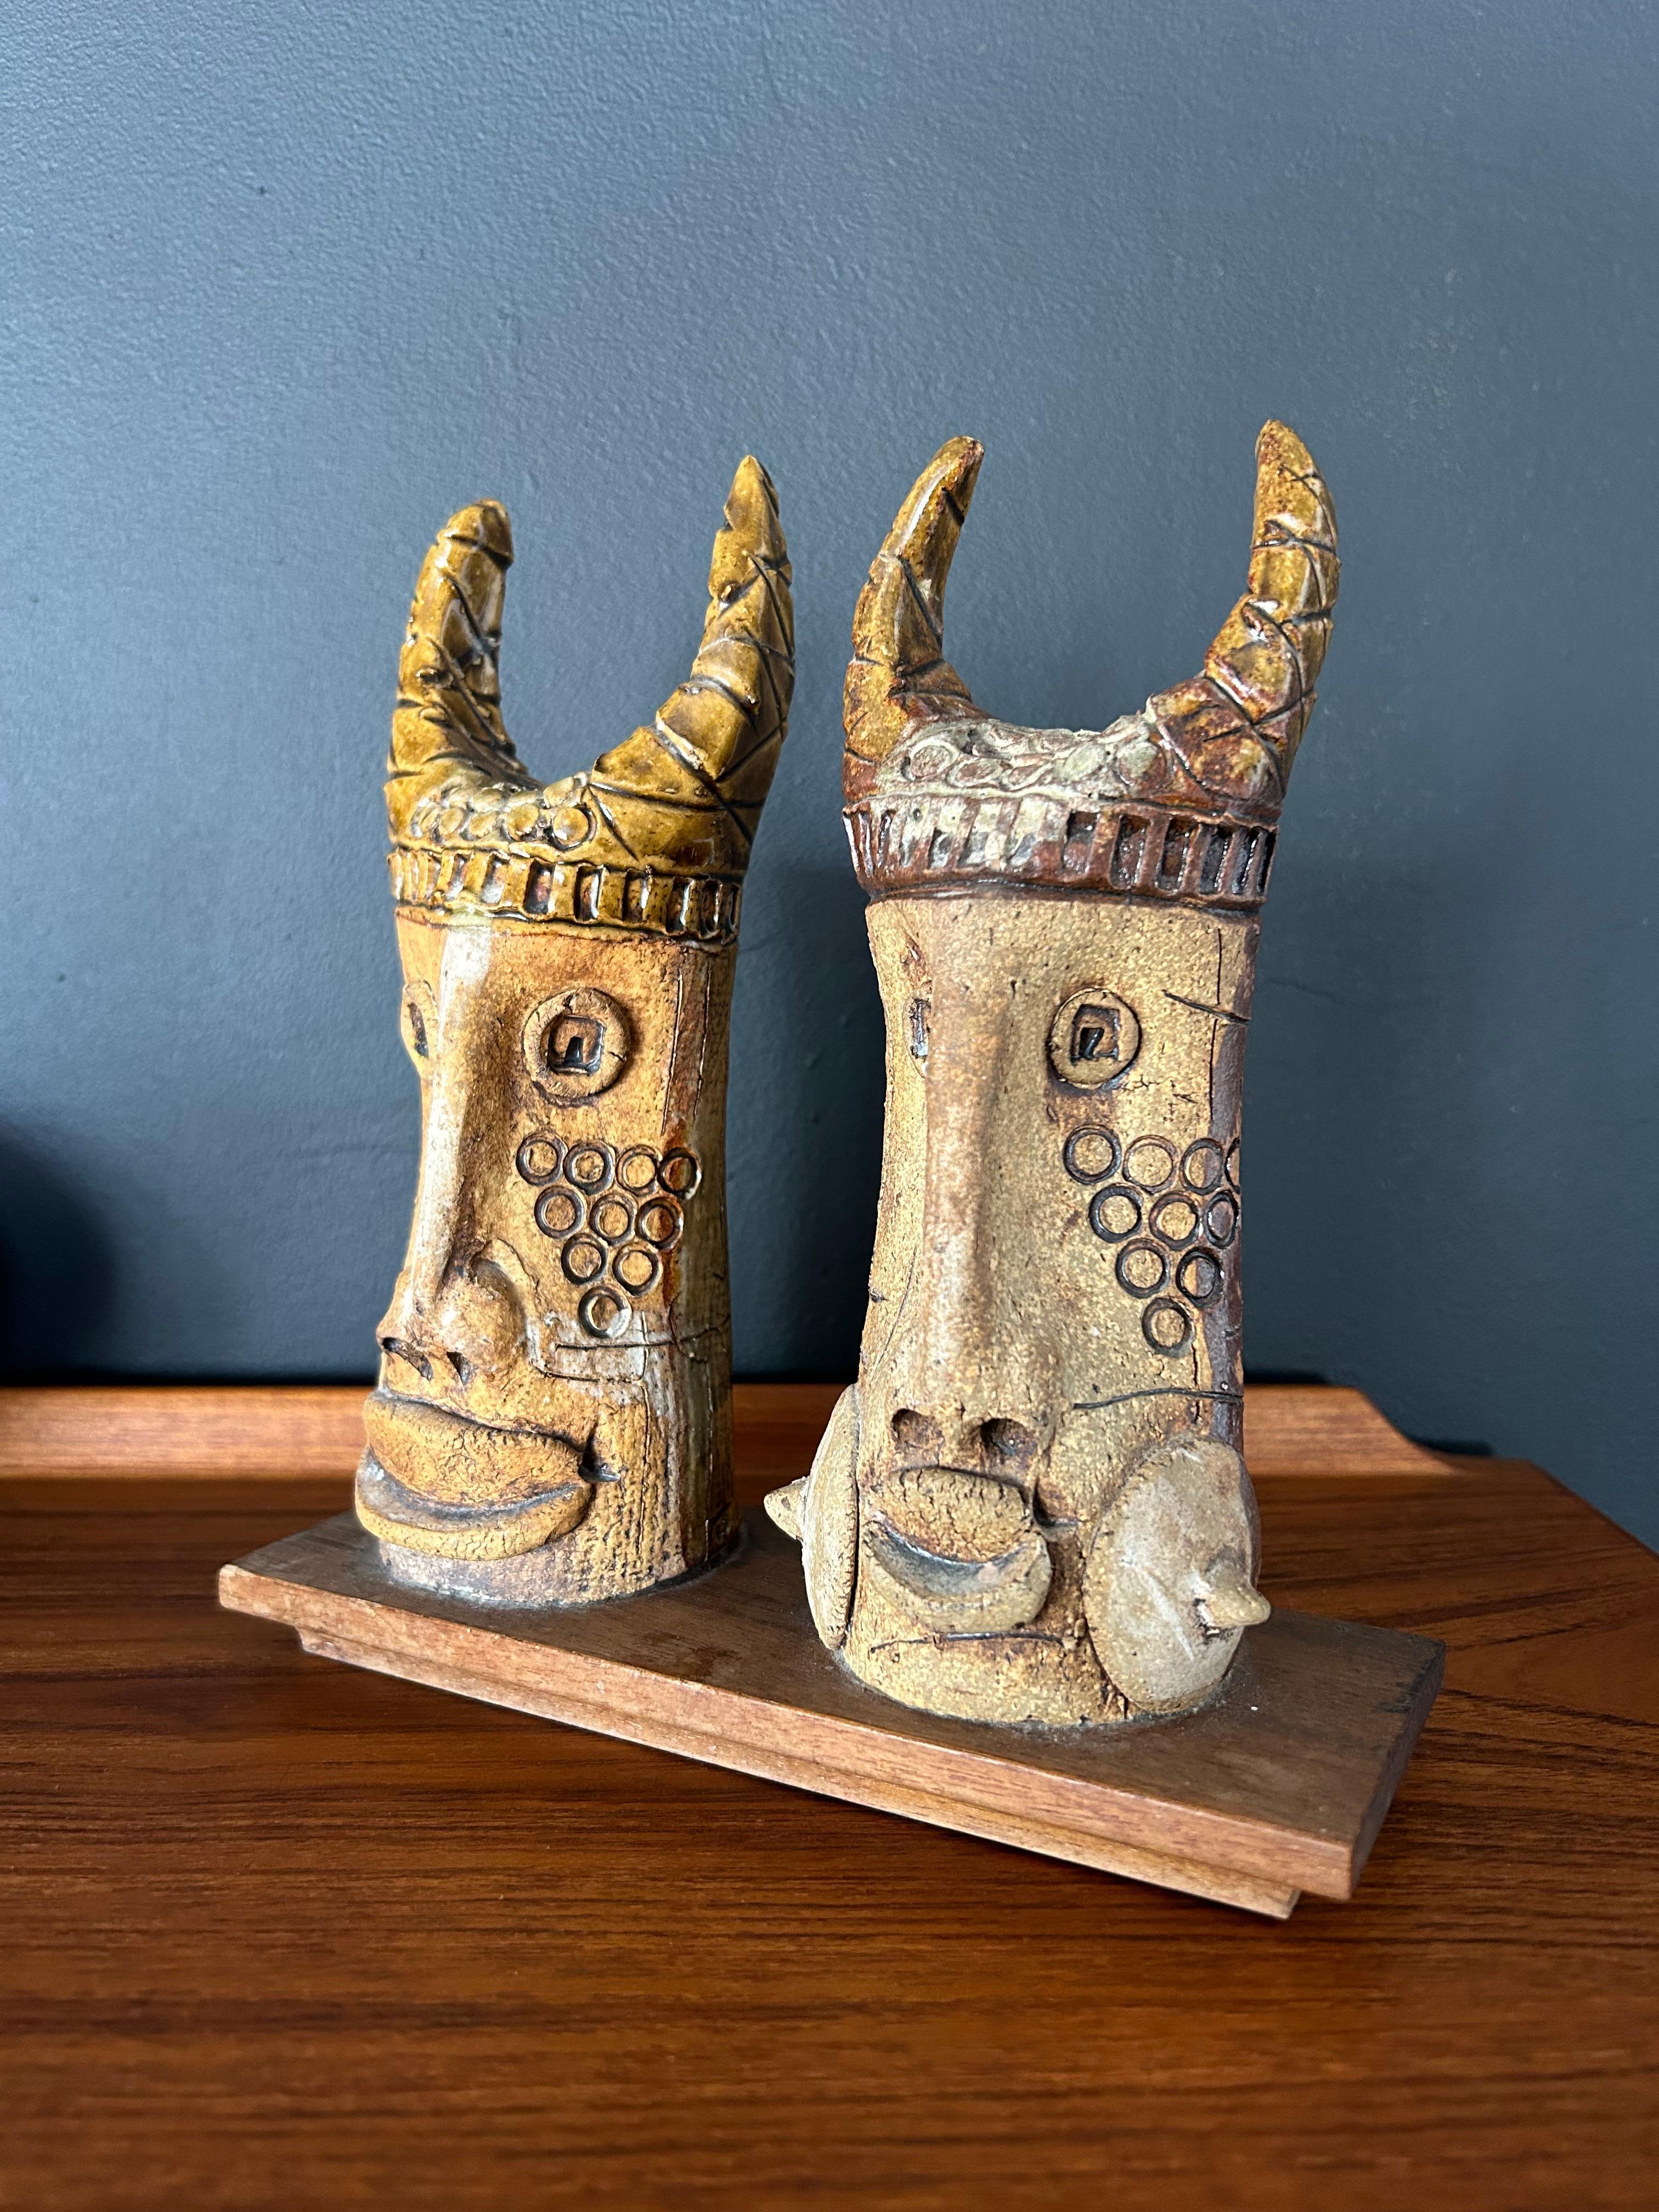 Whimsical pair of ceramic viking faces on a wood base created by artist Hal Fromhold. Art piece includes a hand-written artist label on the bottom inscribed as 